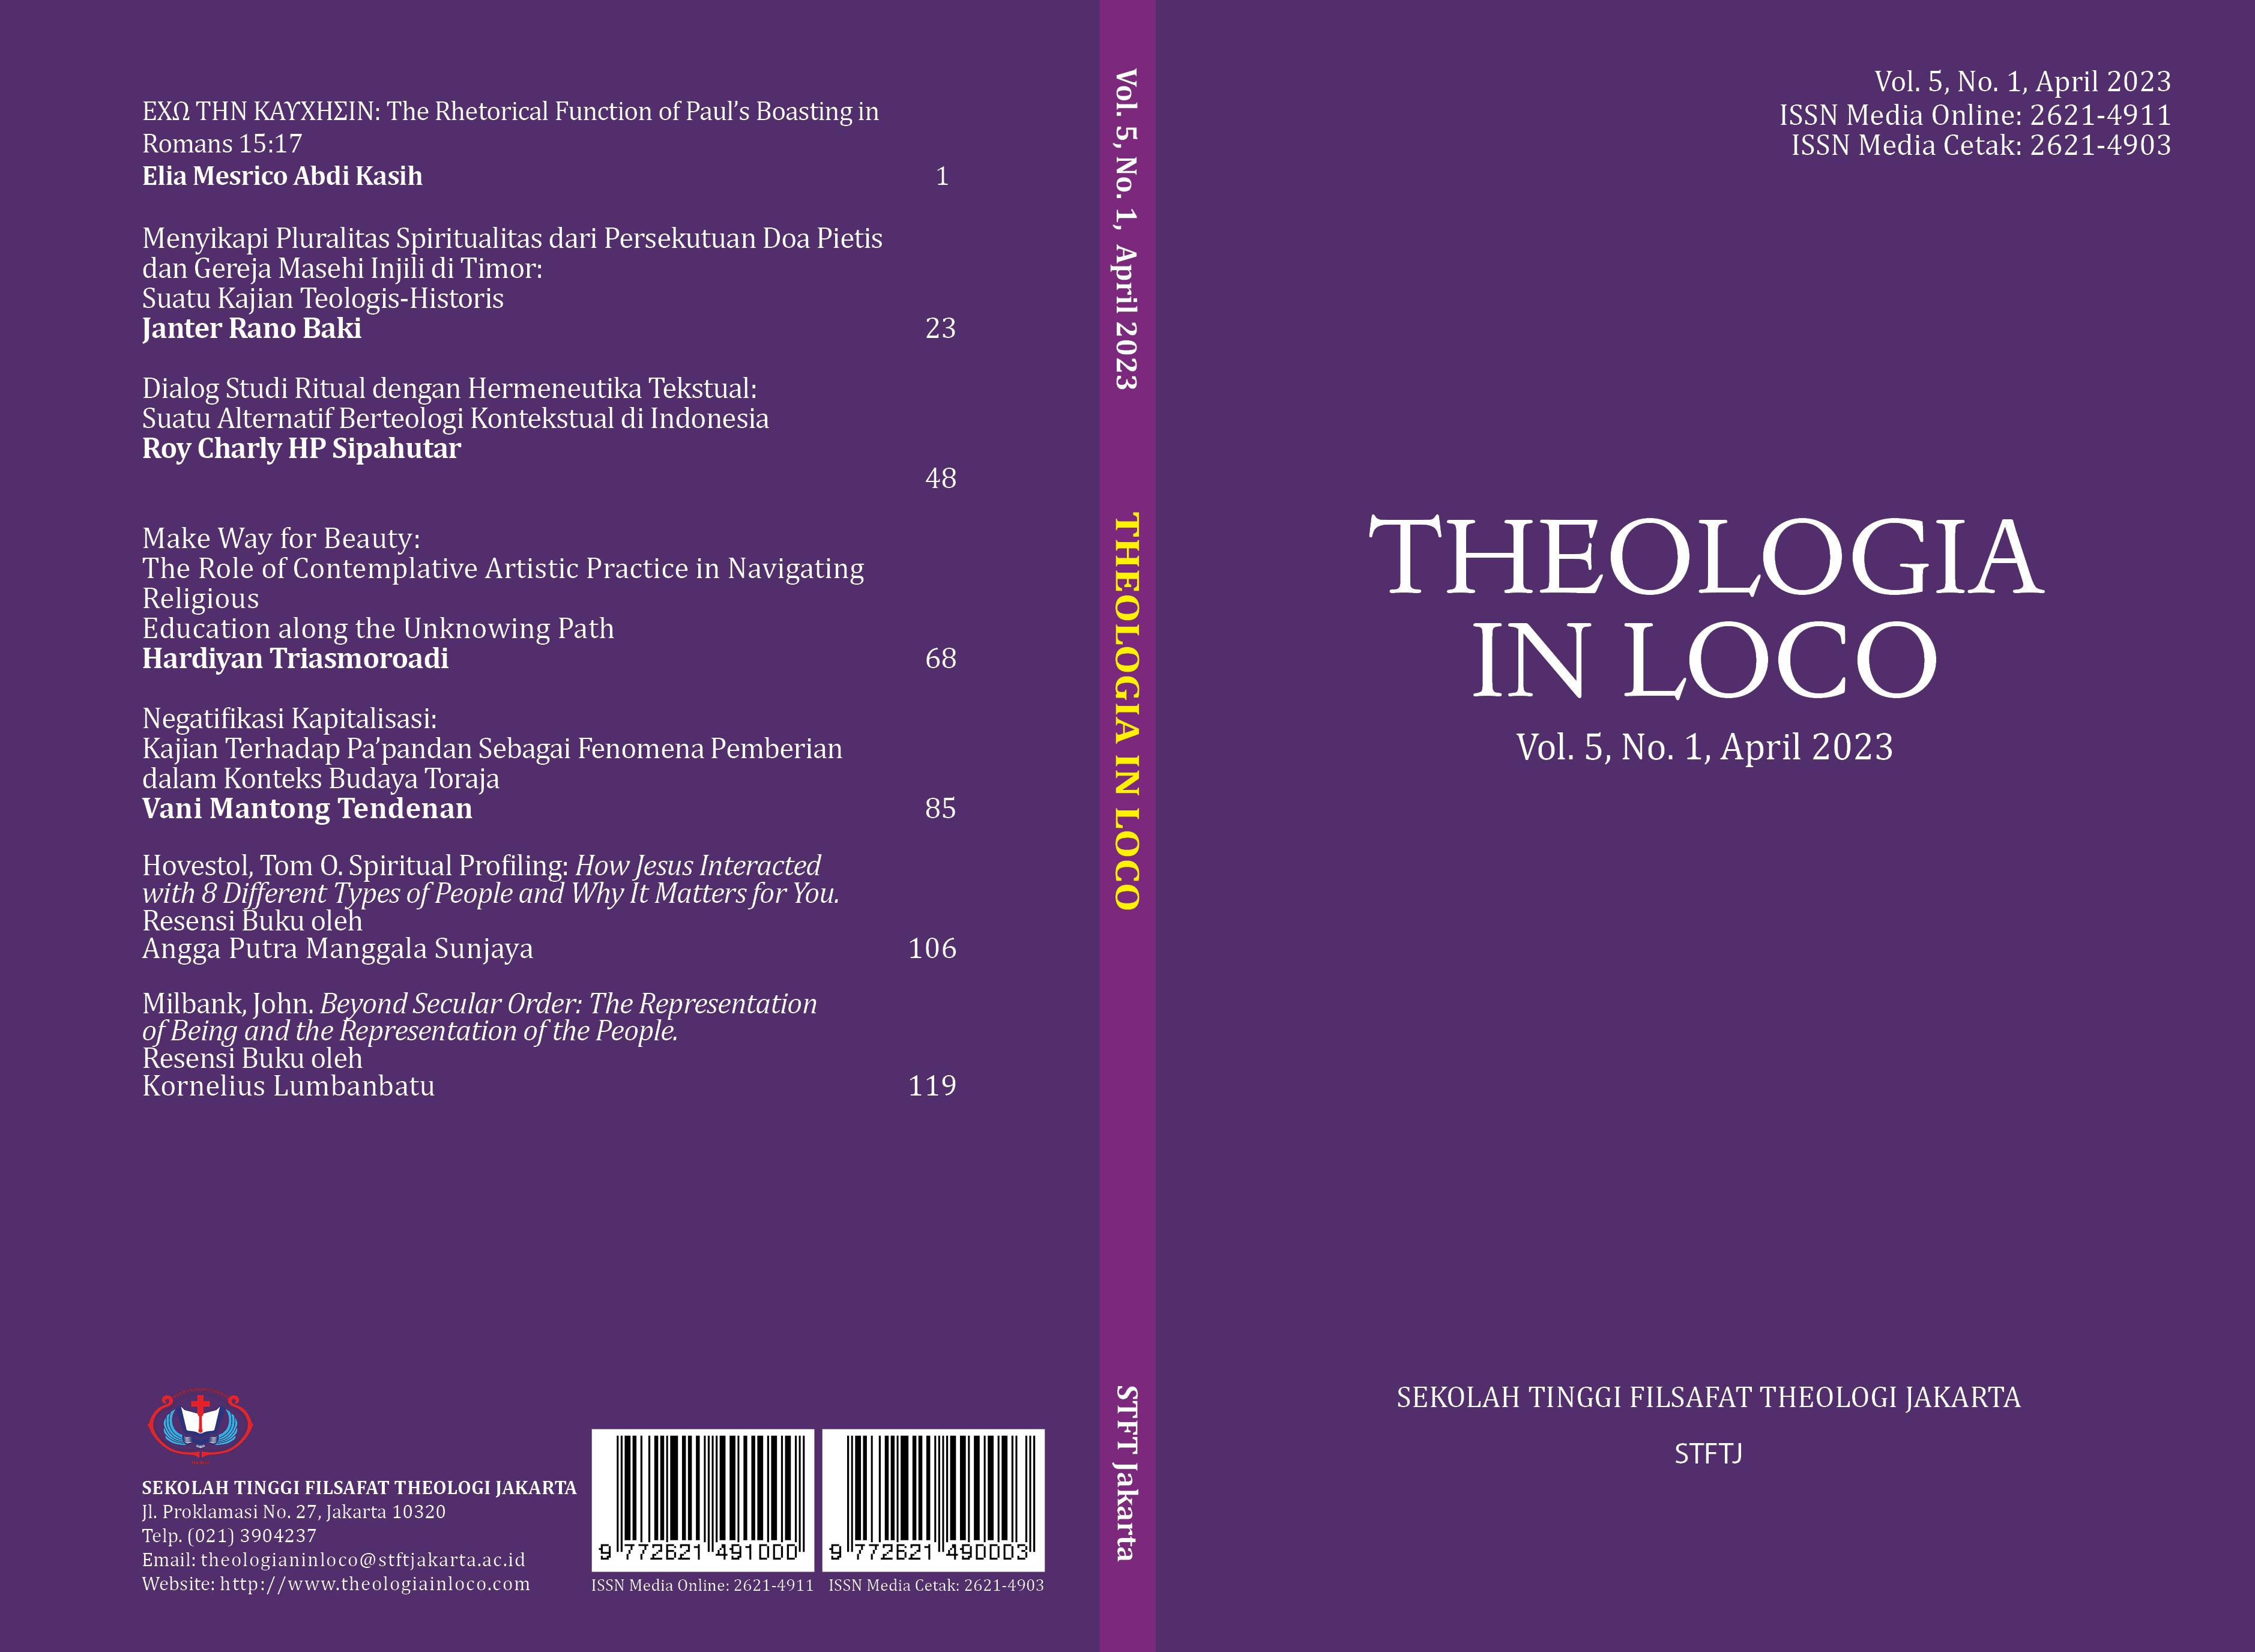 					View Vol. 5 No. 1 (2023): Theologia in Loco
				